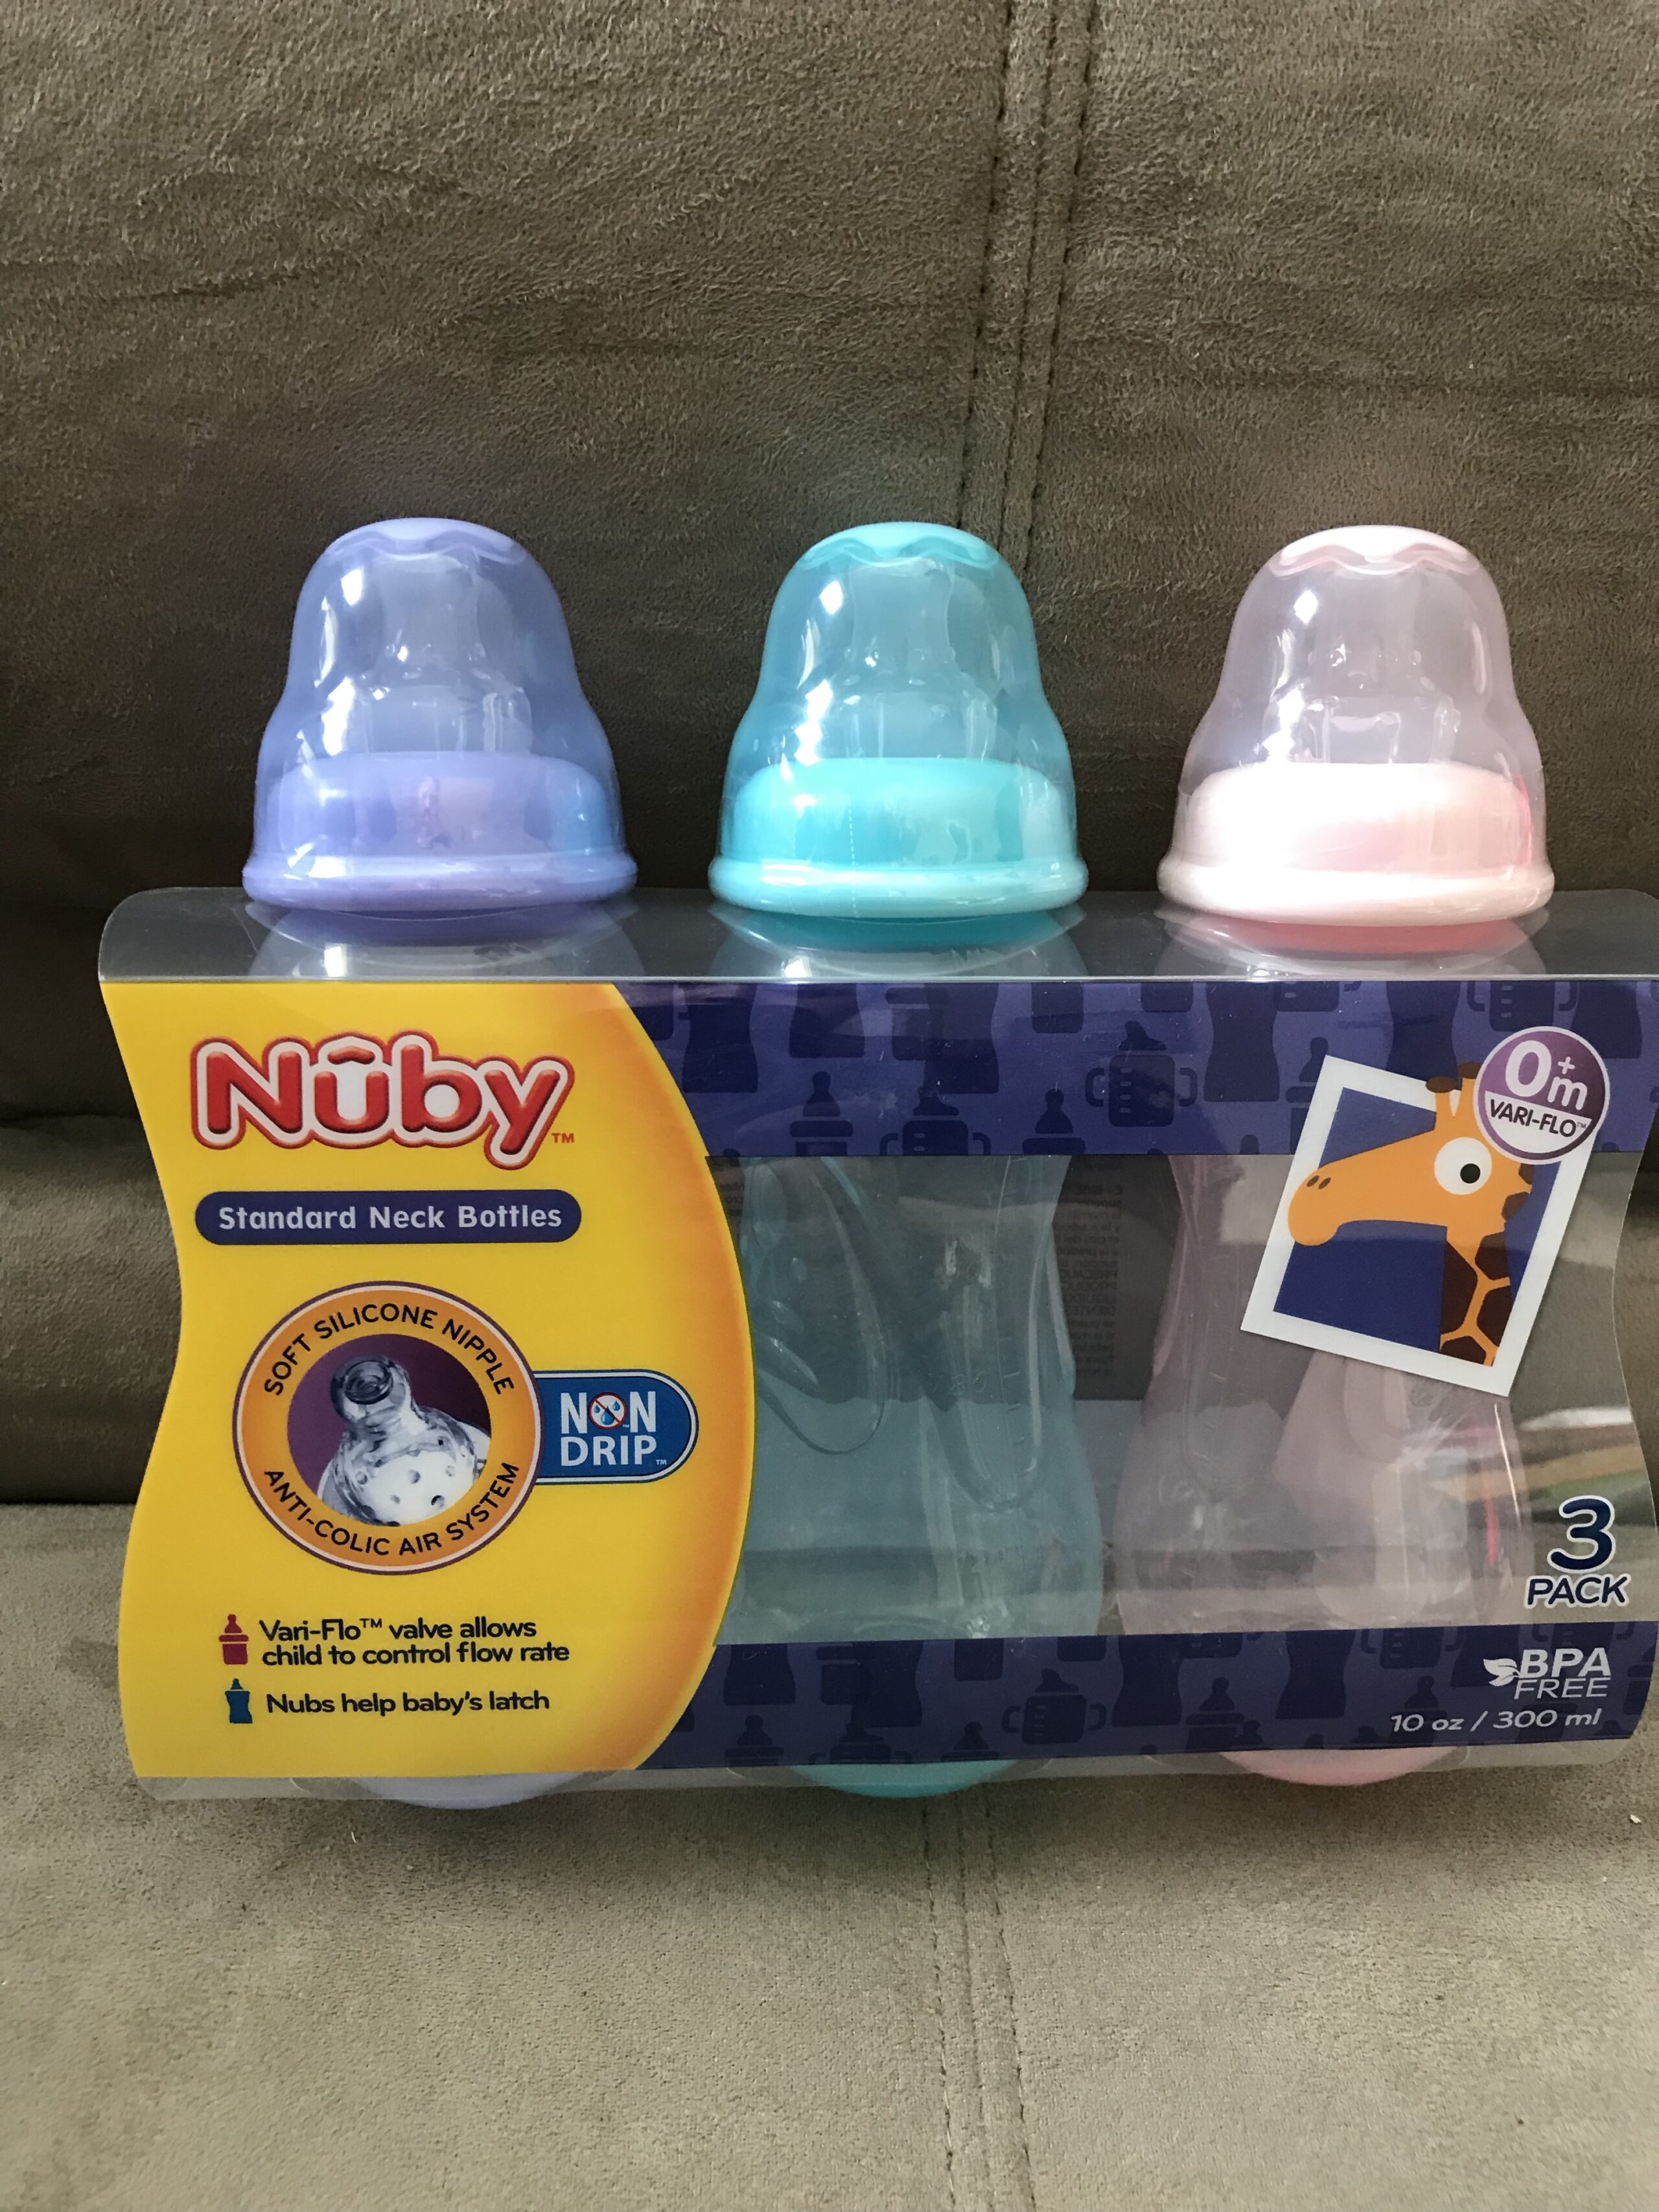 Nuby Makes The Day Go By